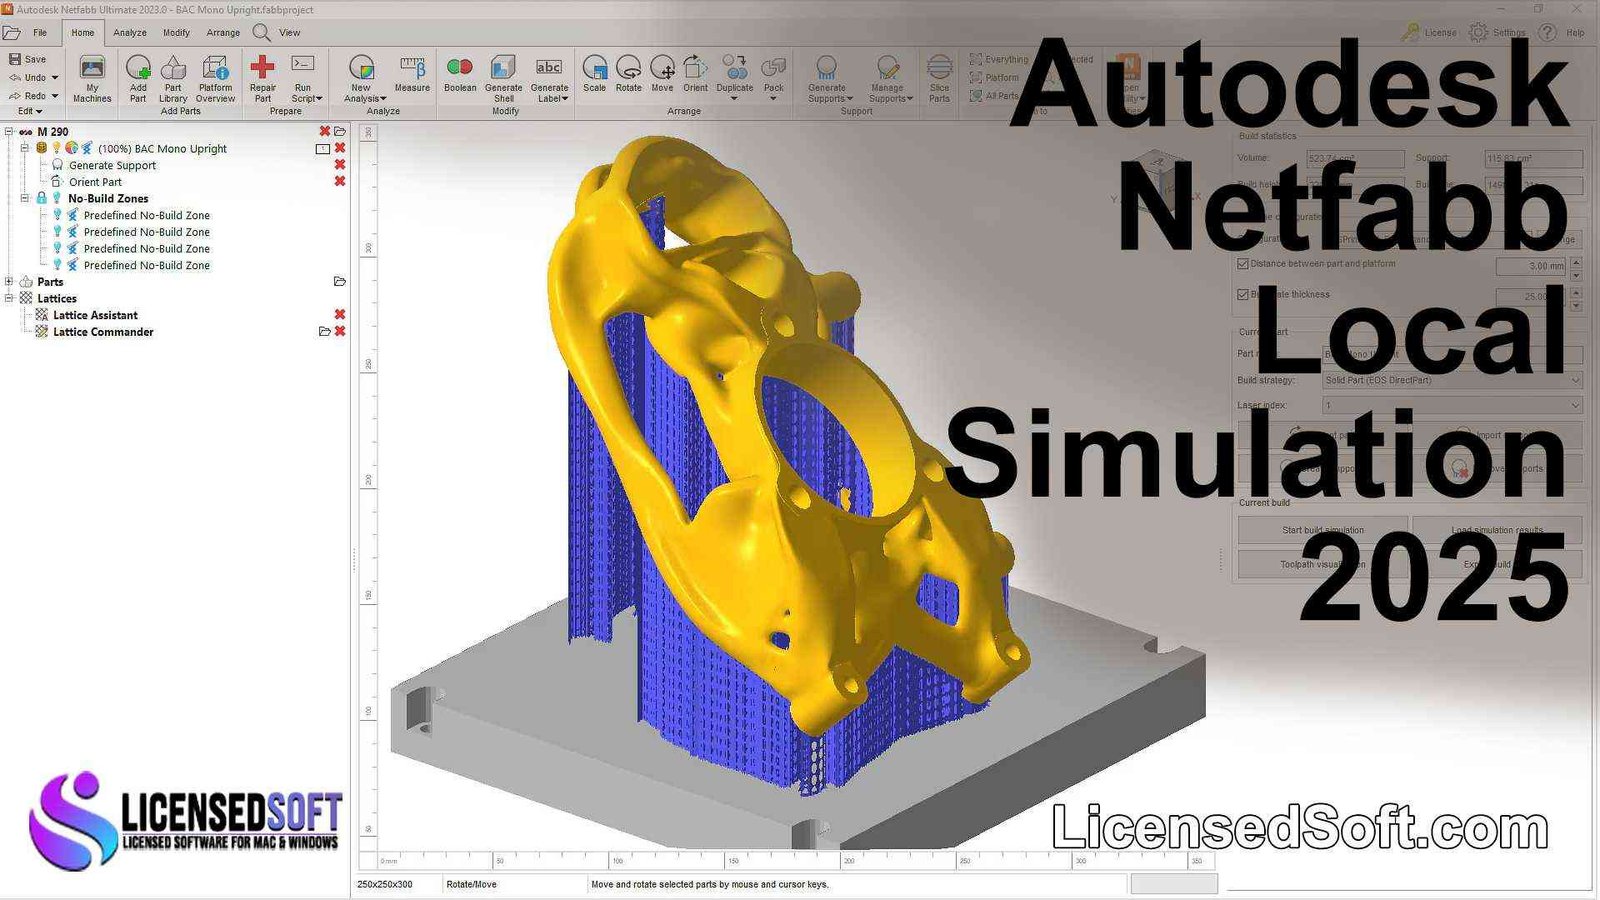 Autodesk Netfabb Local Simulation 2025 Perpetual License By LicensedSoft